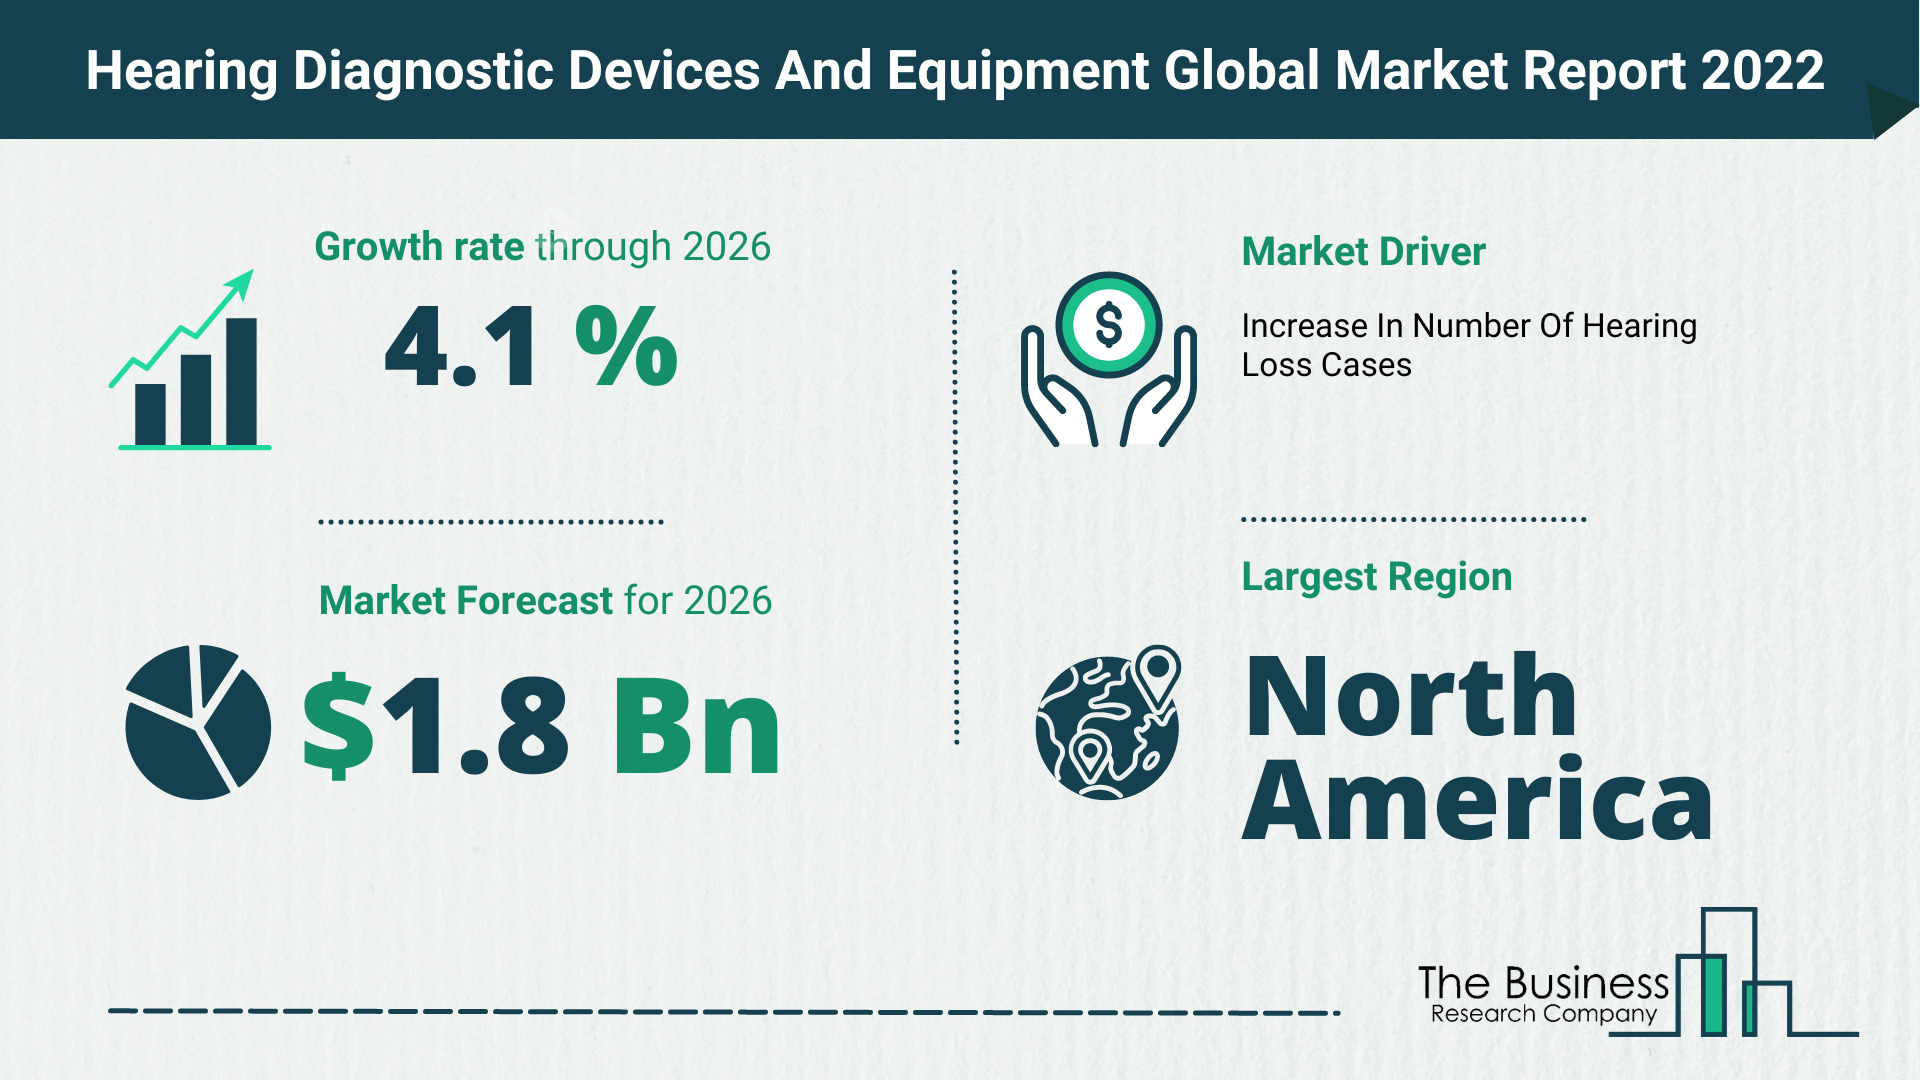 Latest Hearing Diagnostic Devices And Equipment Market Growth Study 2022-2026 By The Business Research Company